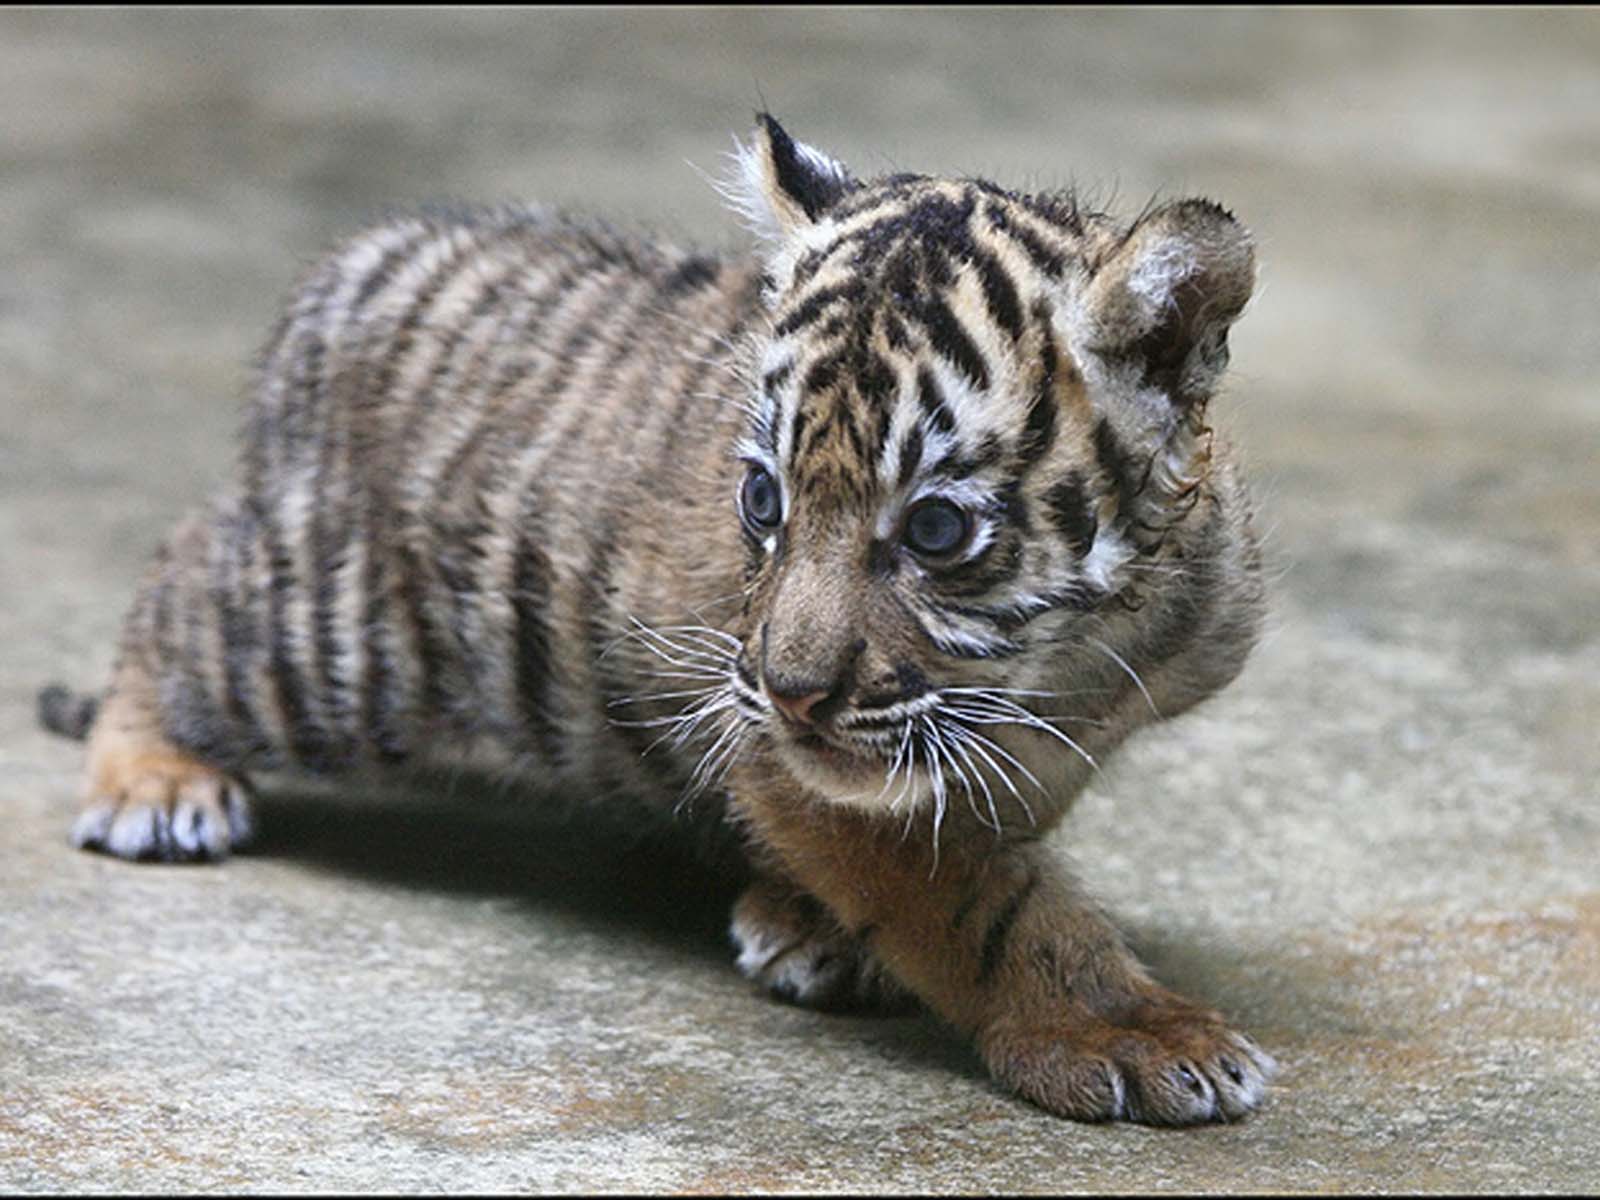 Baby Tiger Pictures